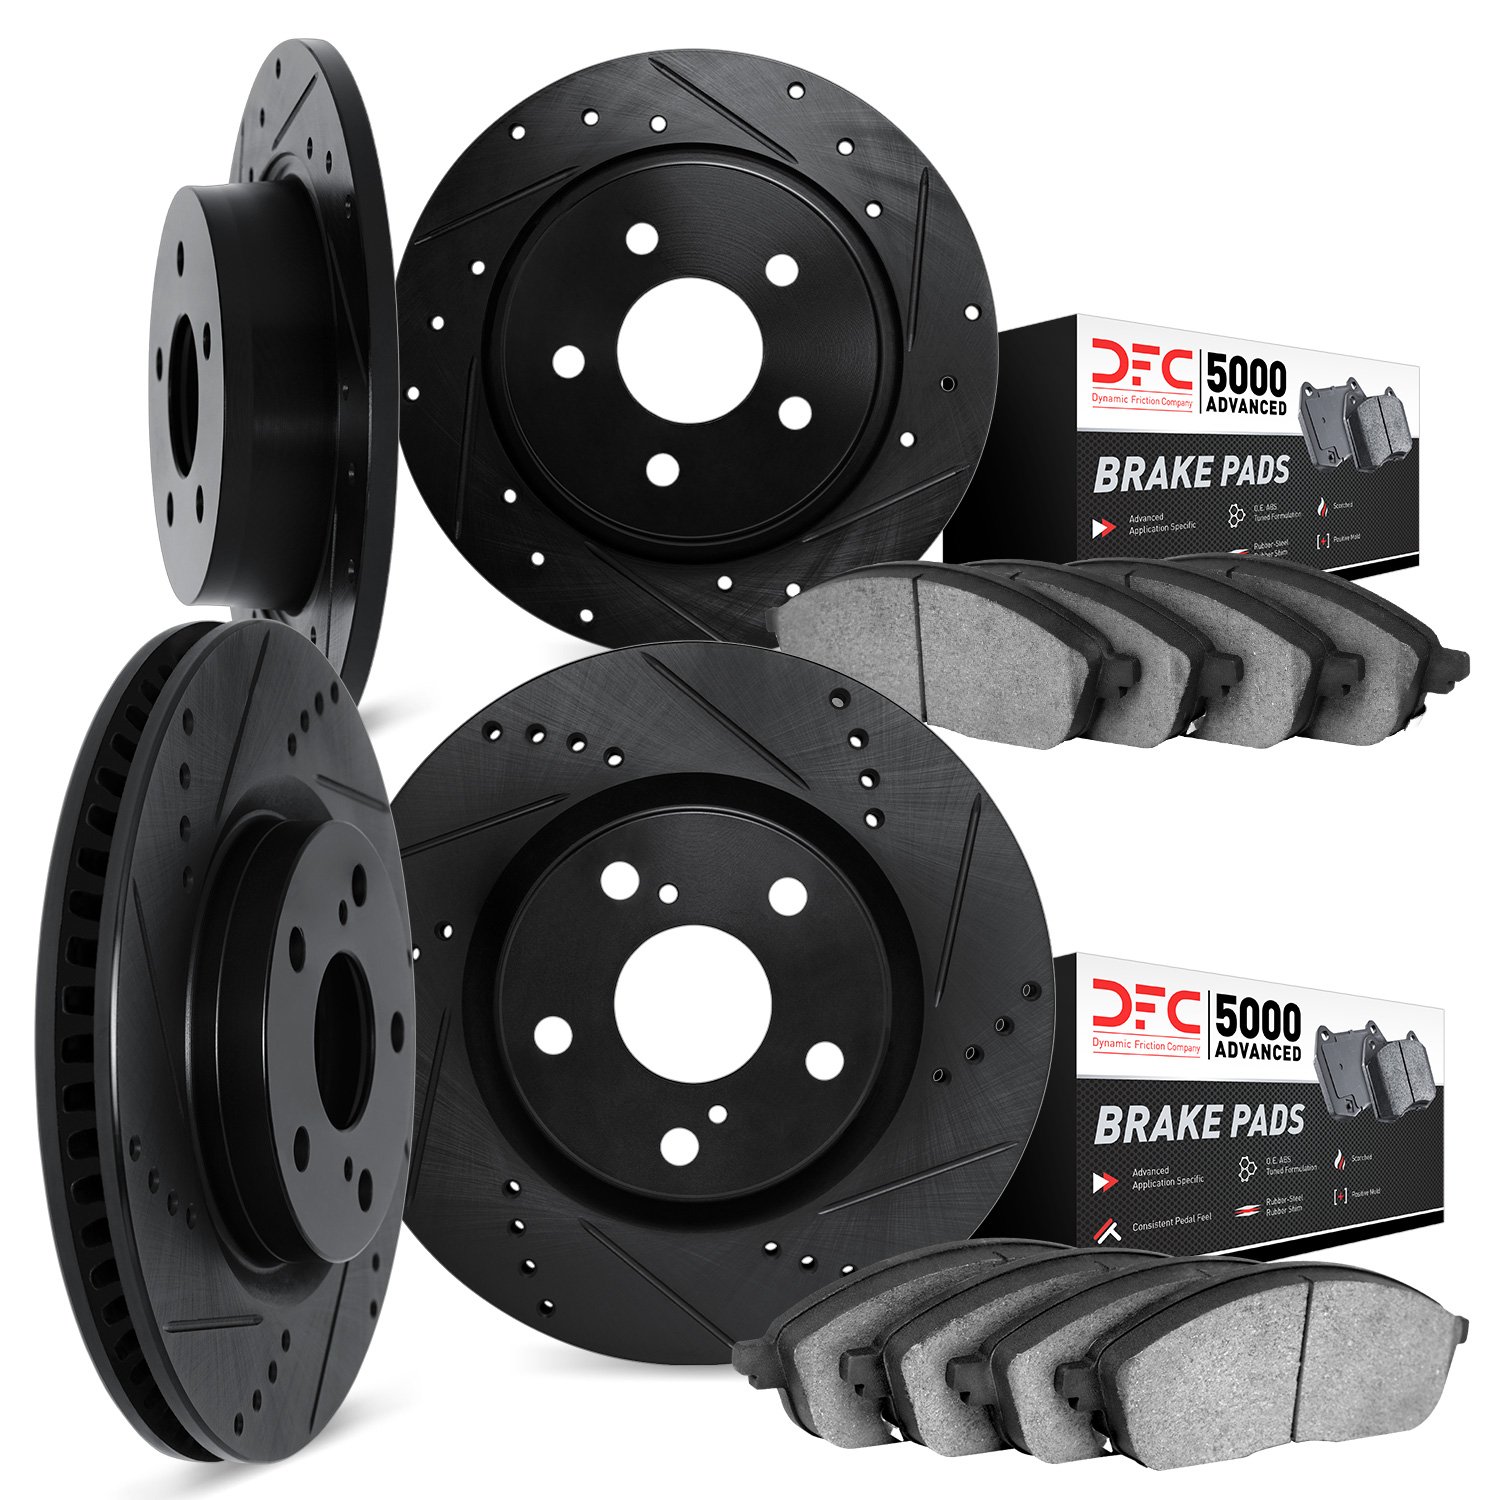 8504-76141 Drilled/Slotted Brake Rotors w/5000 Advanced Brake Pads Kit [Black], 2004-2004 Lexus/Toyota/Scion, Position: Front an